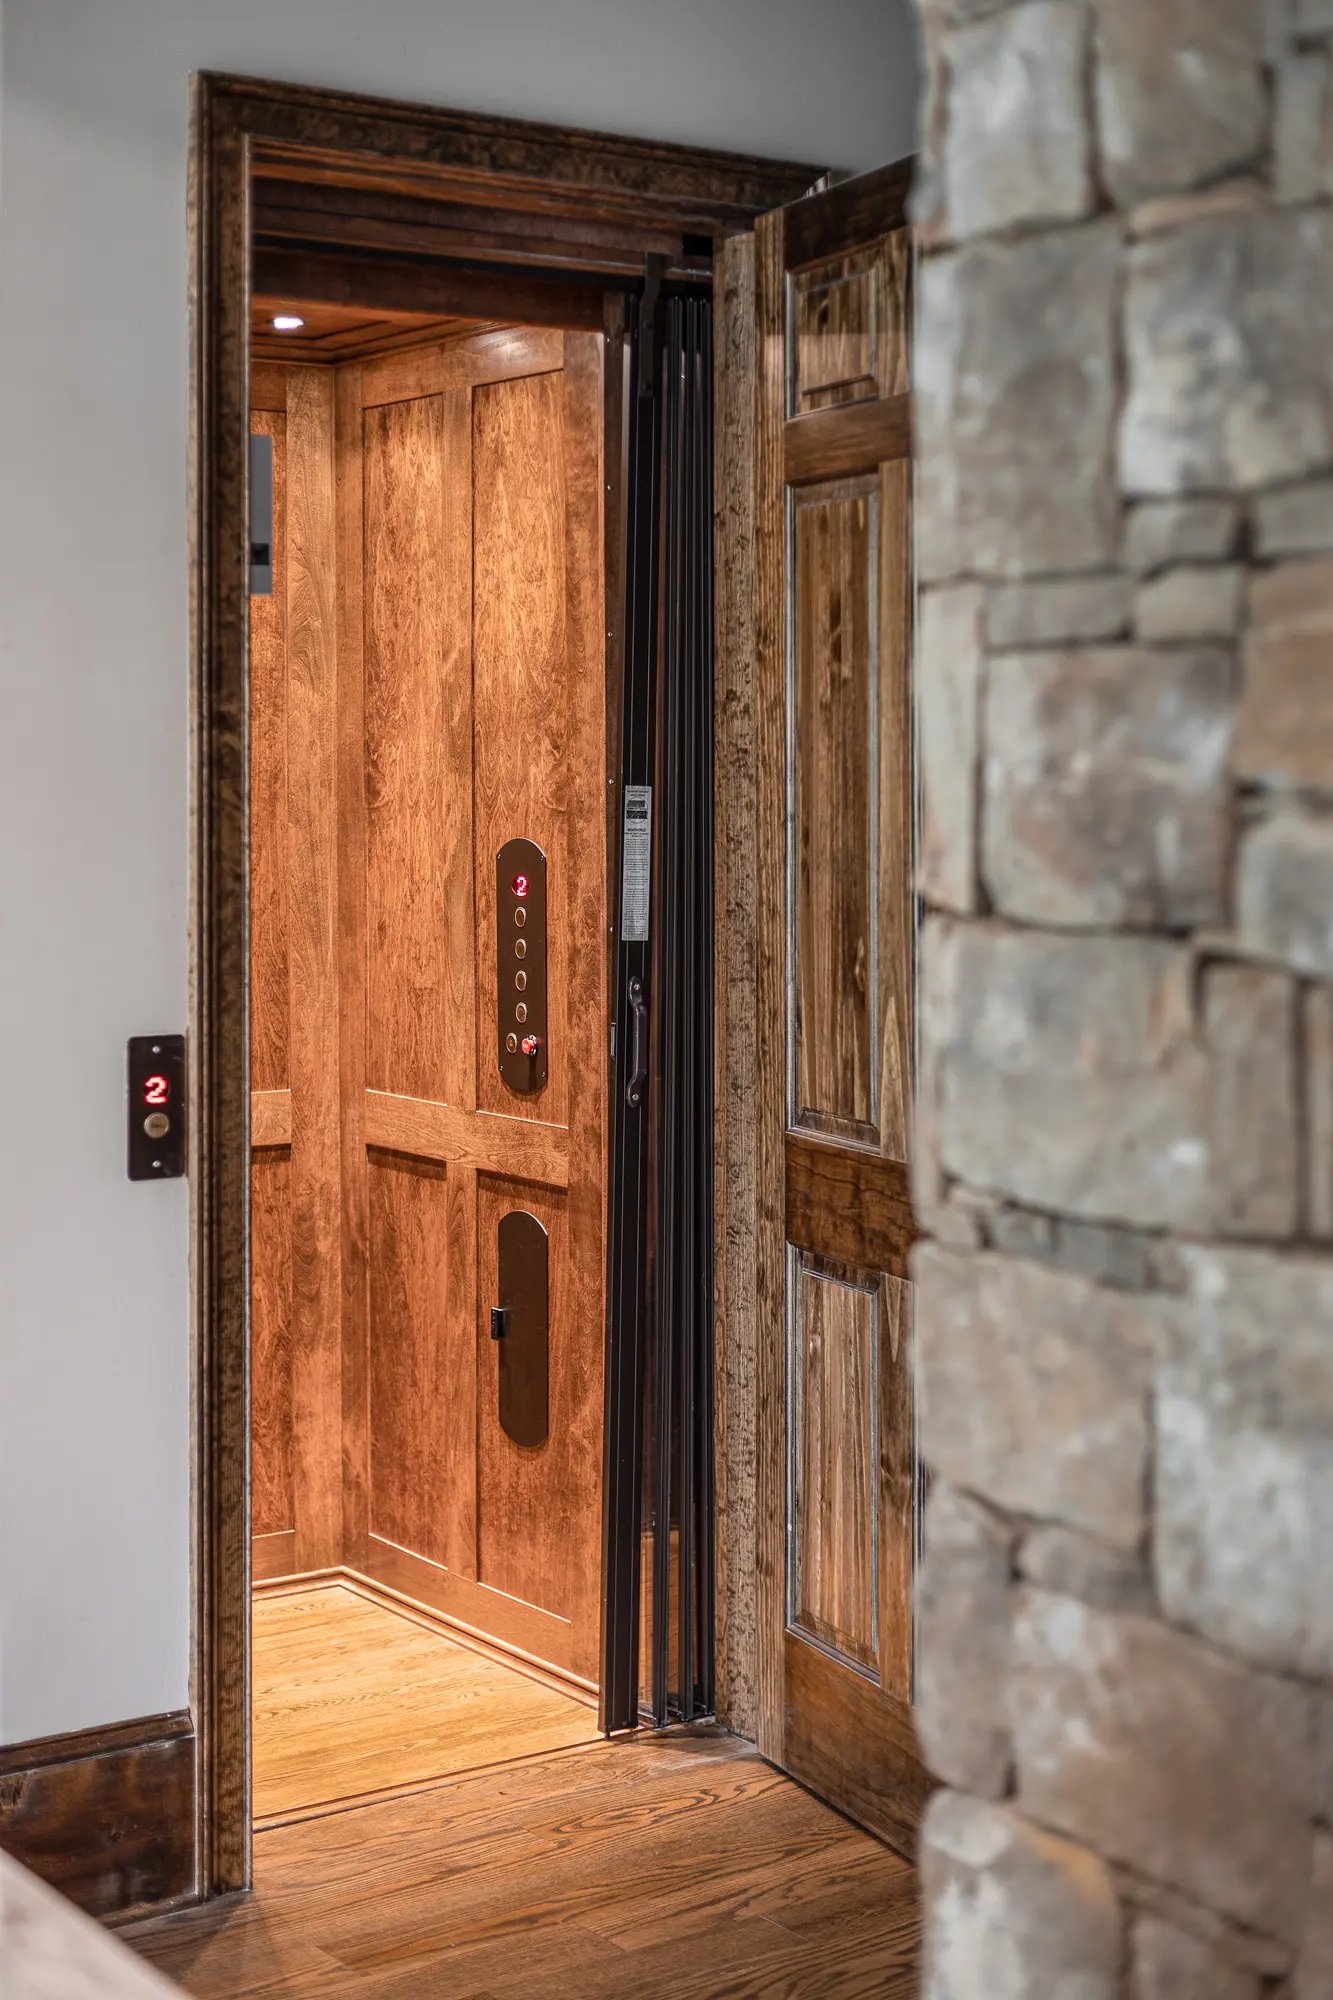 Elegant home elevator entrance with rich wooden doors and stone wall detailing.